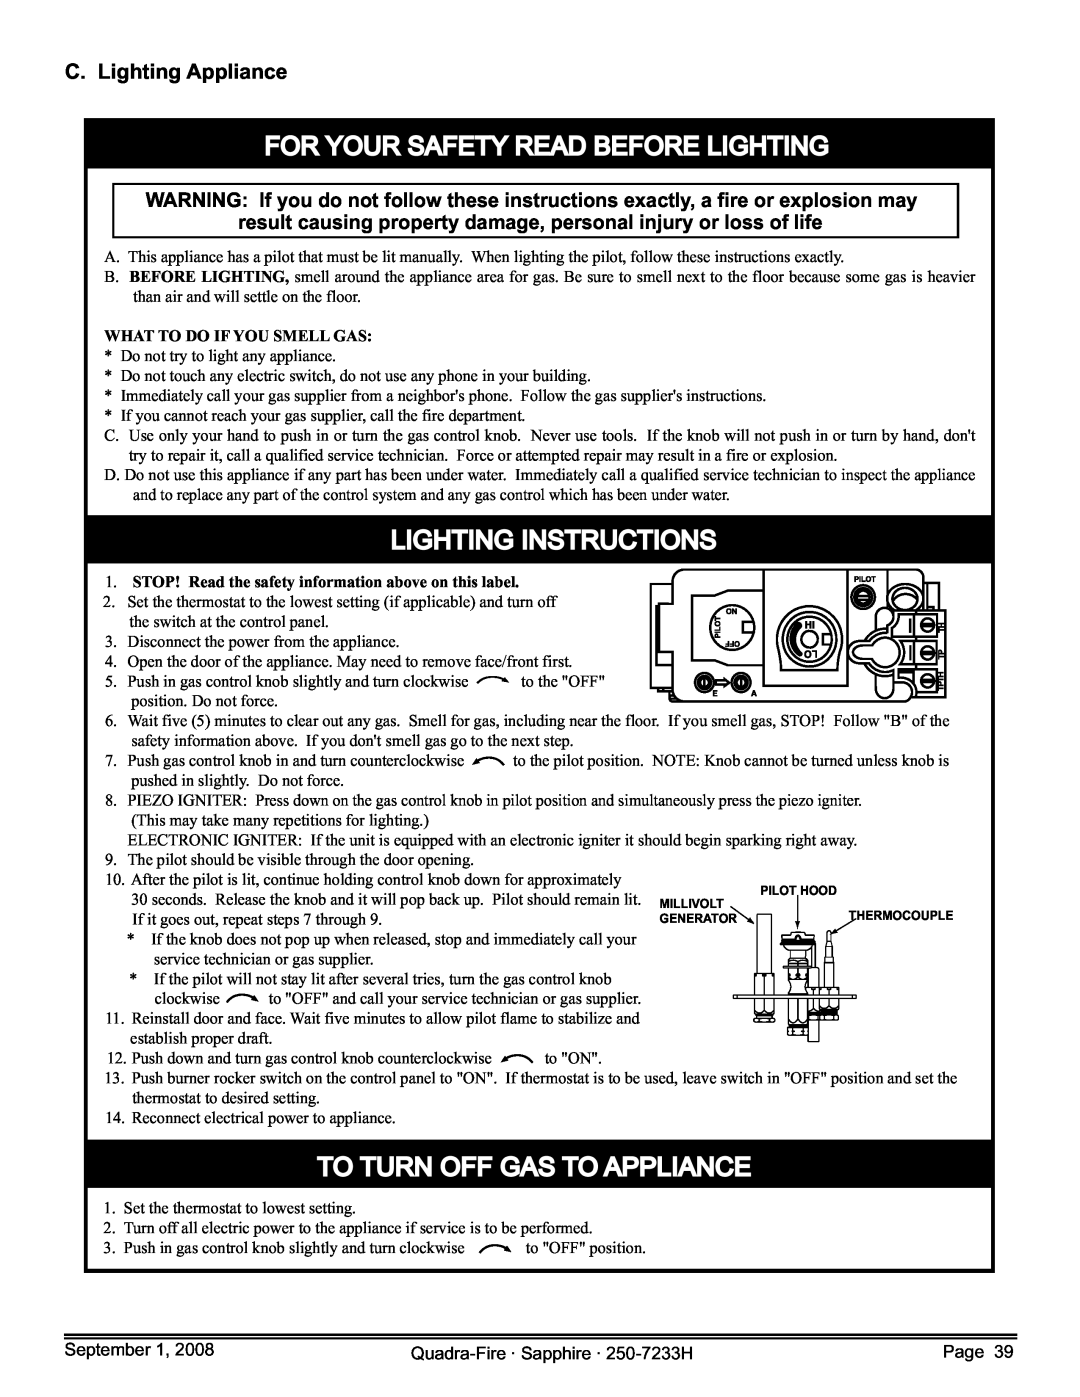 Hearth and Home Technologies SAPPH-D-CSB, 839-1390, 839-1440 C. Lighting Appliance, For Your Safety Read Before Lighting 